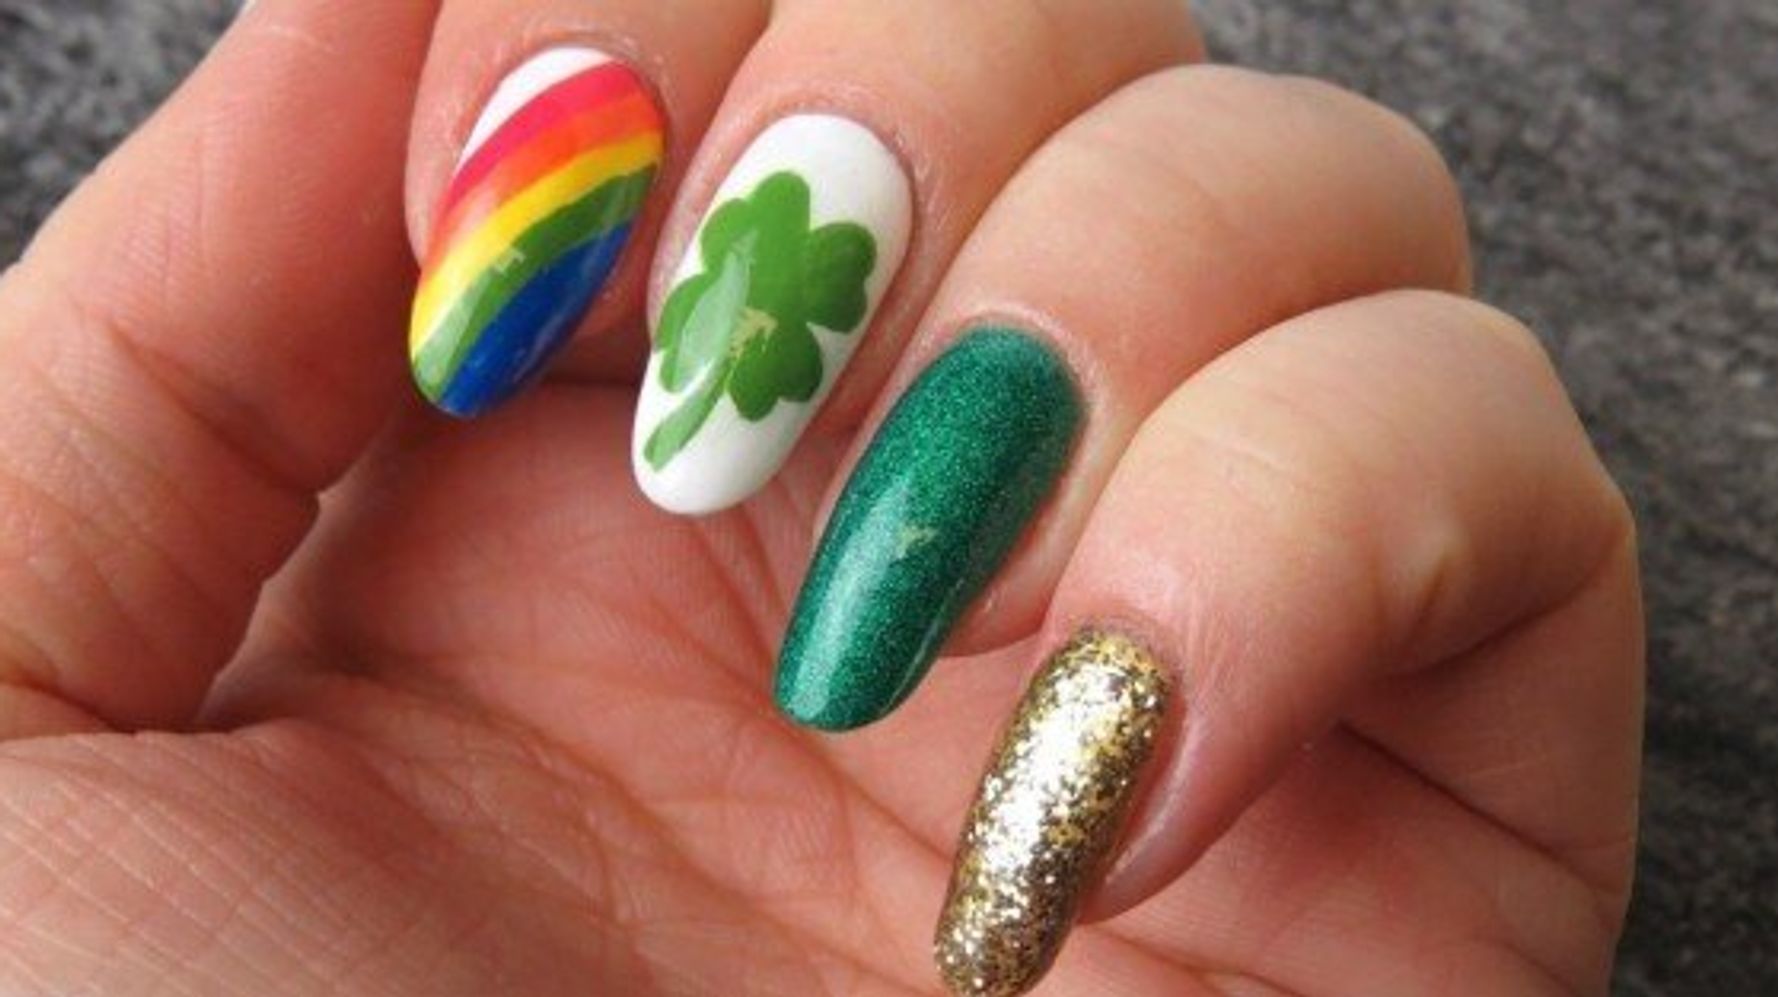 St. Patrick's Day Nail Art Ideas - wide 6